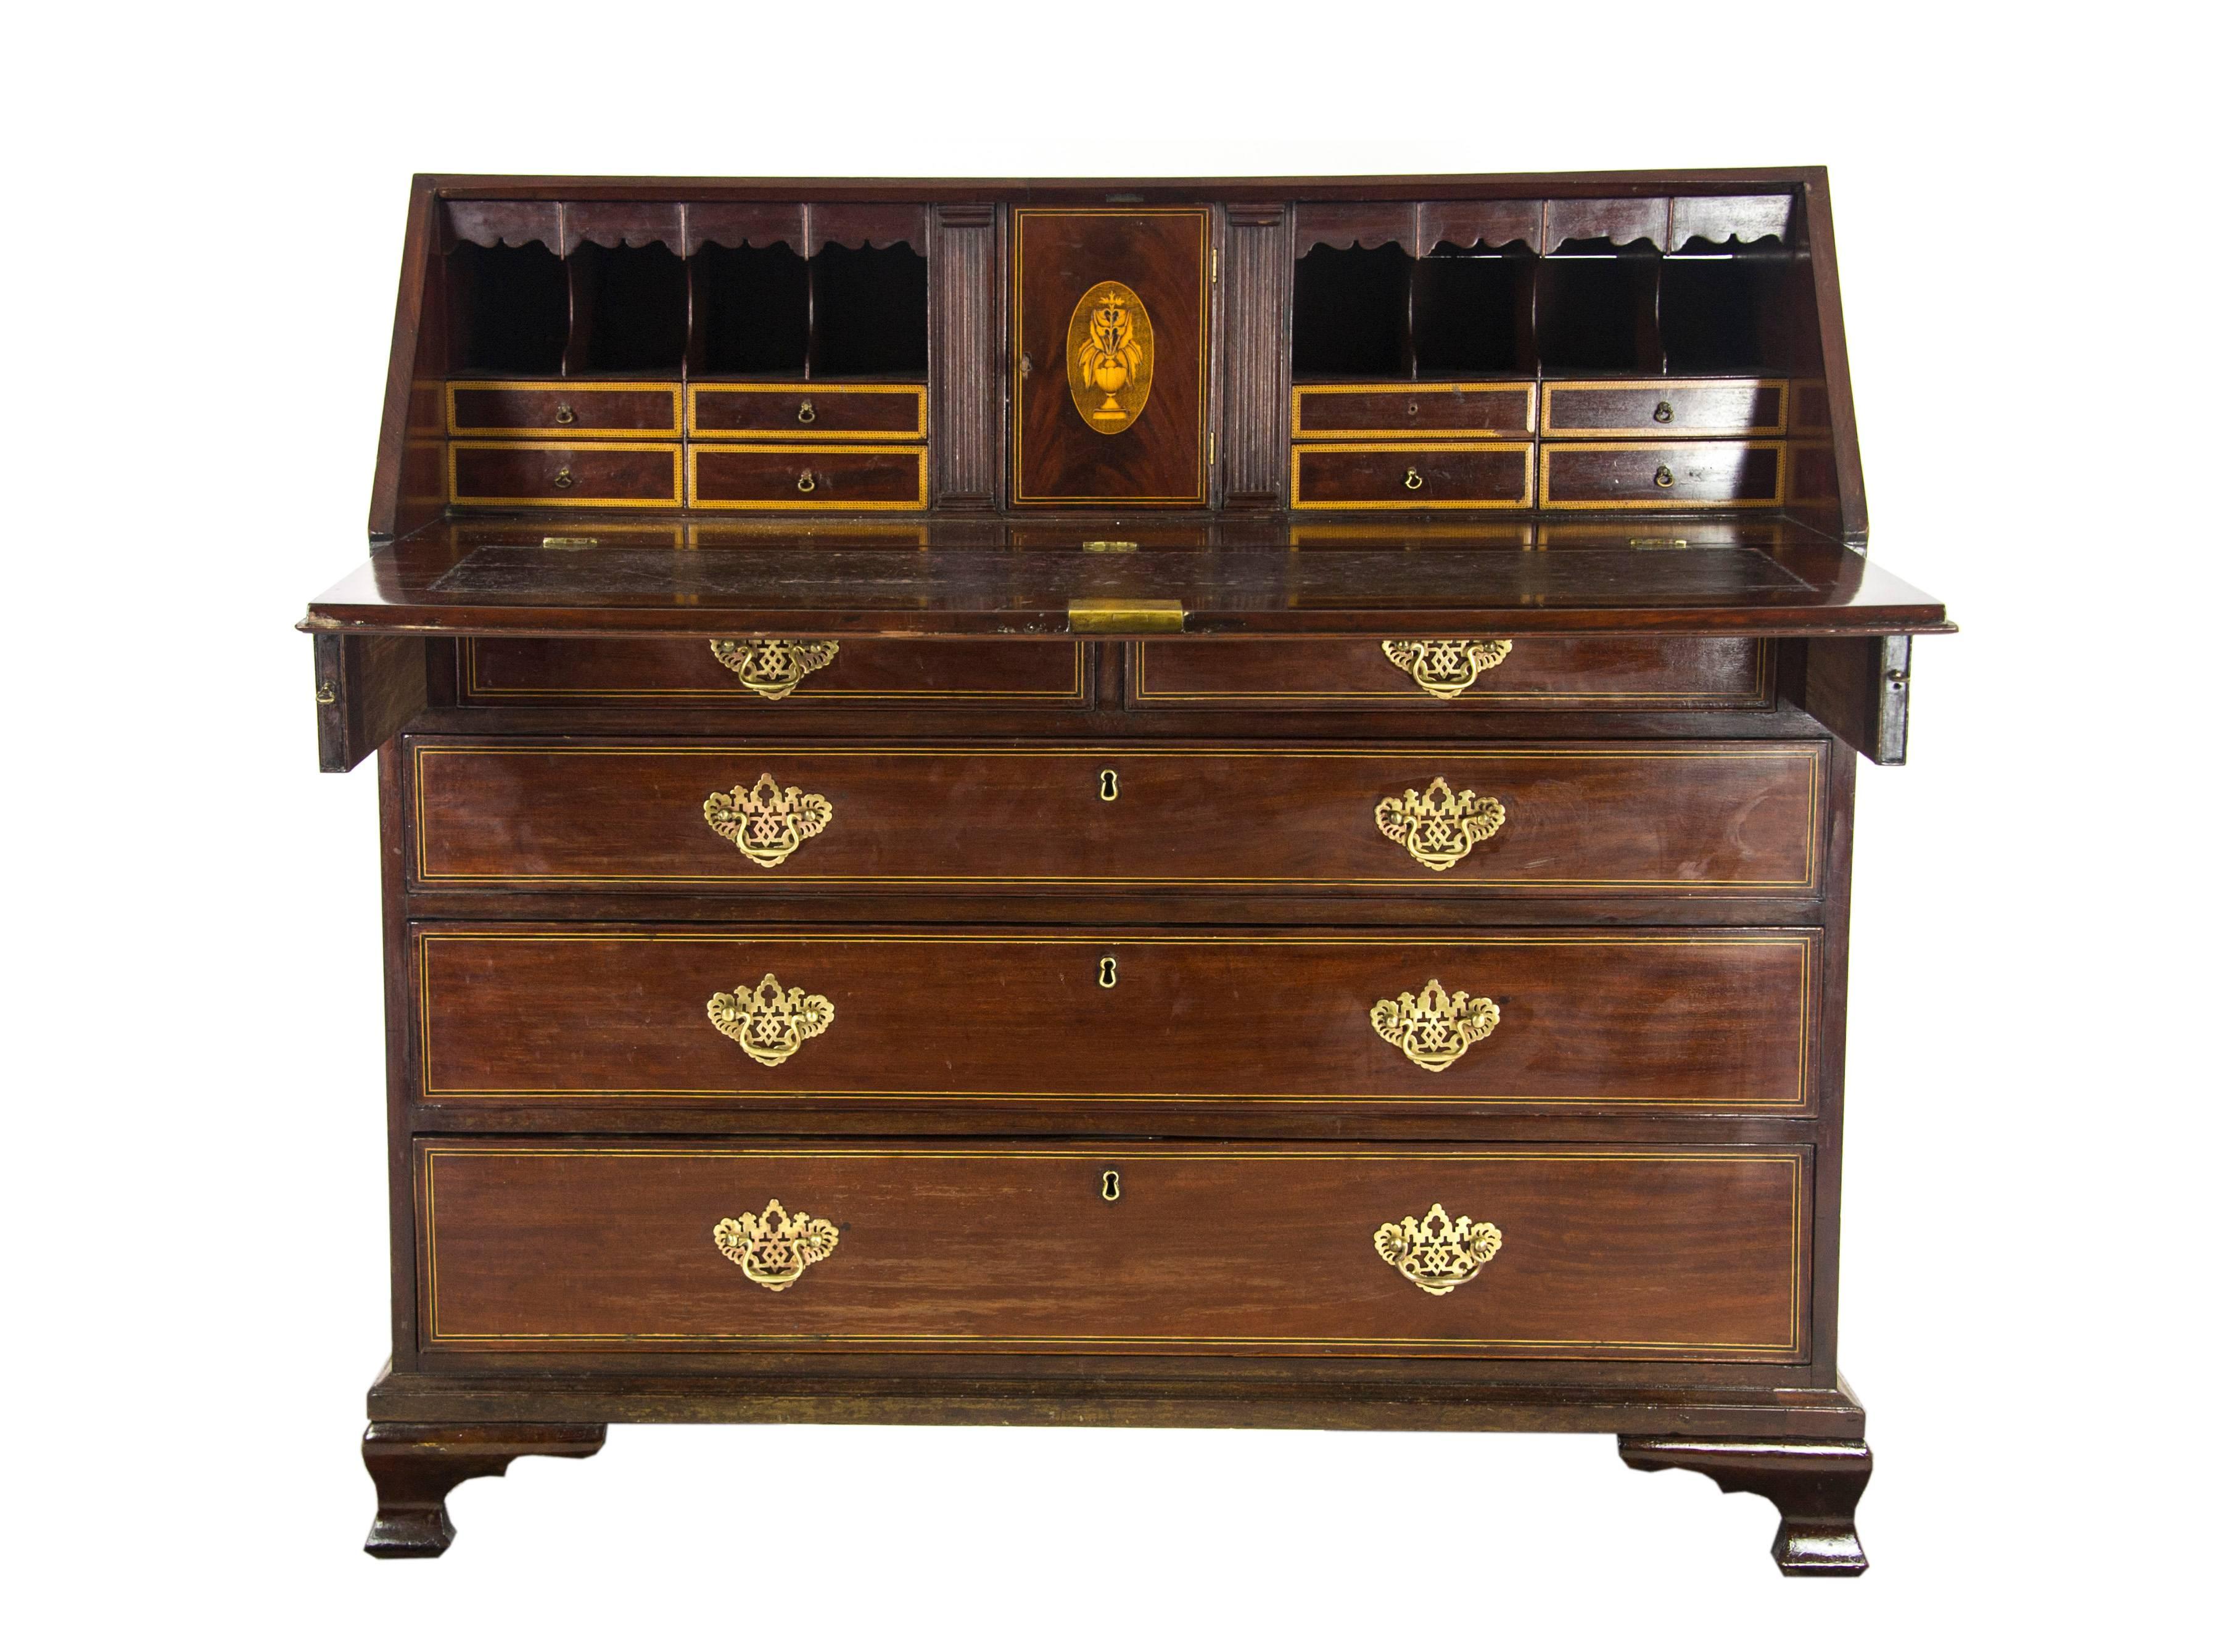 Walnut bureau, antique drop front desk, writing table, George III, antique furniture, B1032

Scotland 1800
Solid Walnut with satinwood veneers
Inlaid top
Inlaid Walnut fall front opens to reveal a quality fitted interior
Eight satinwood inlaid